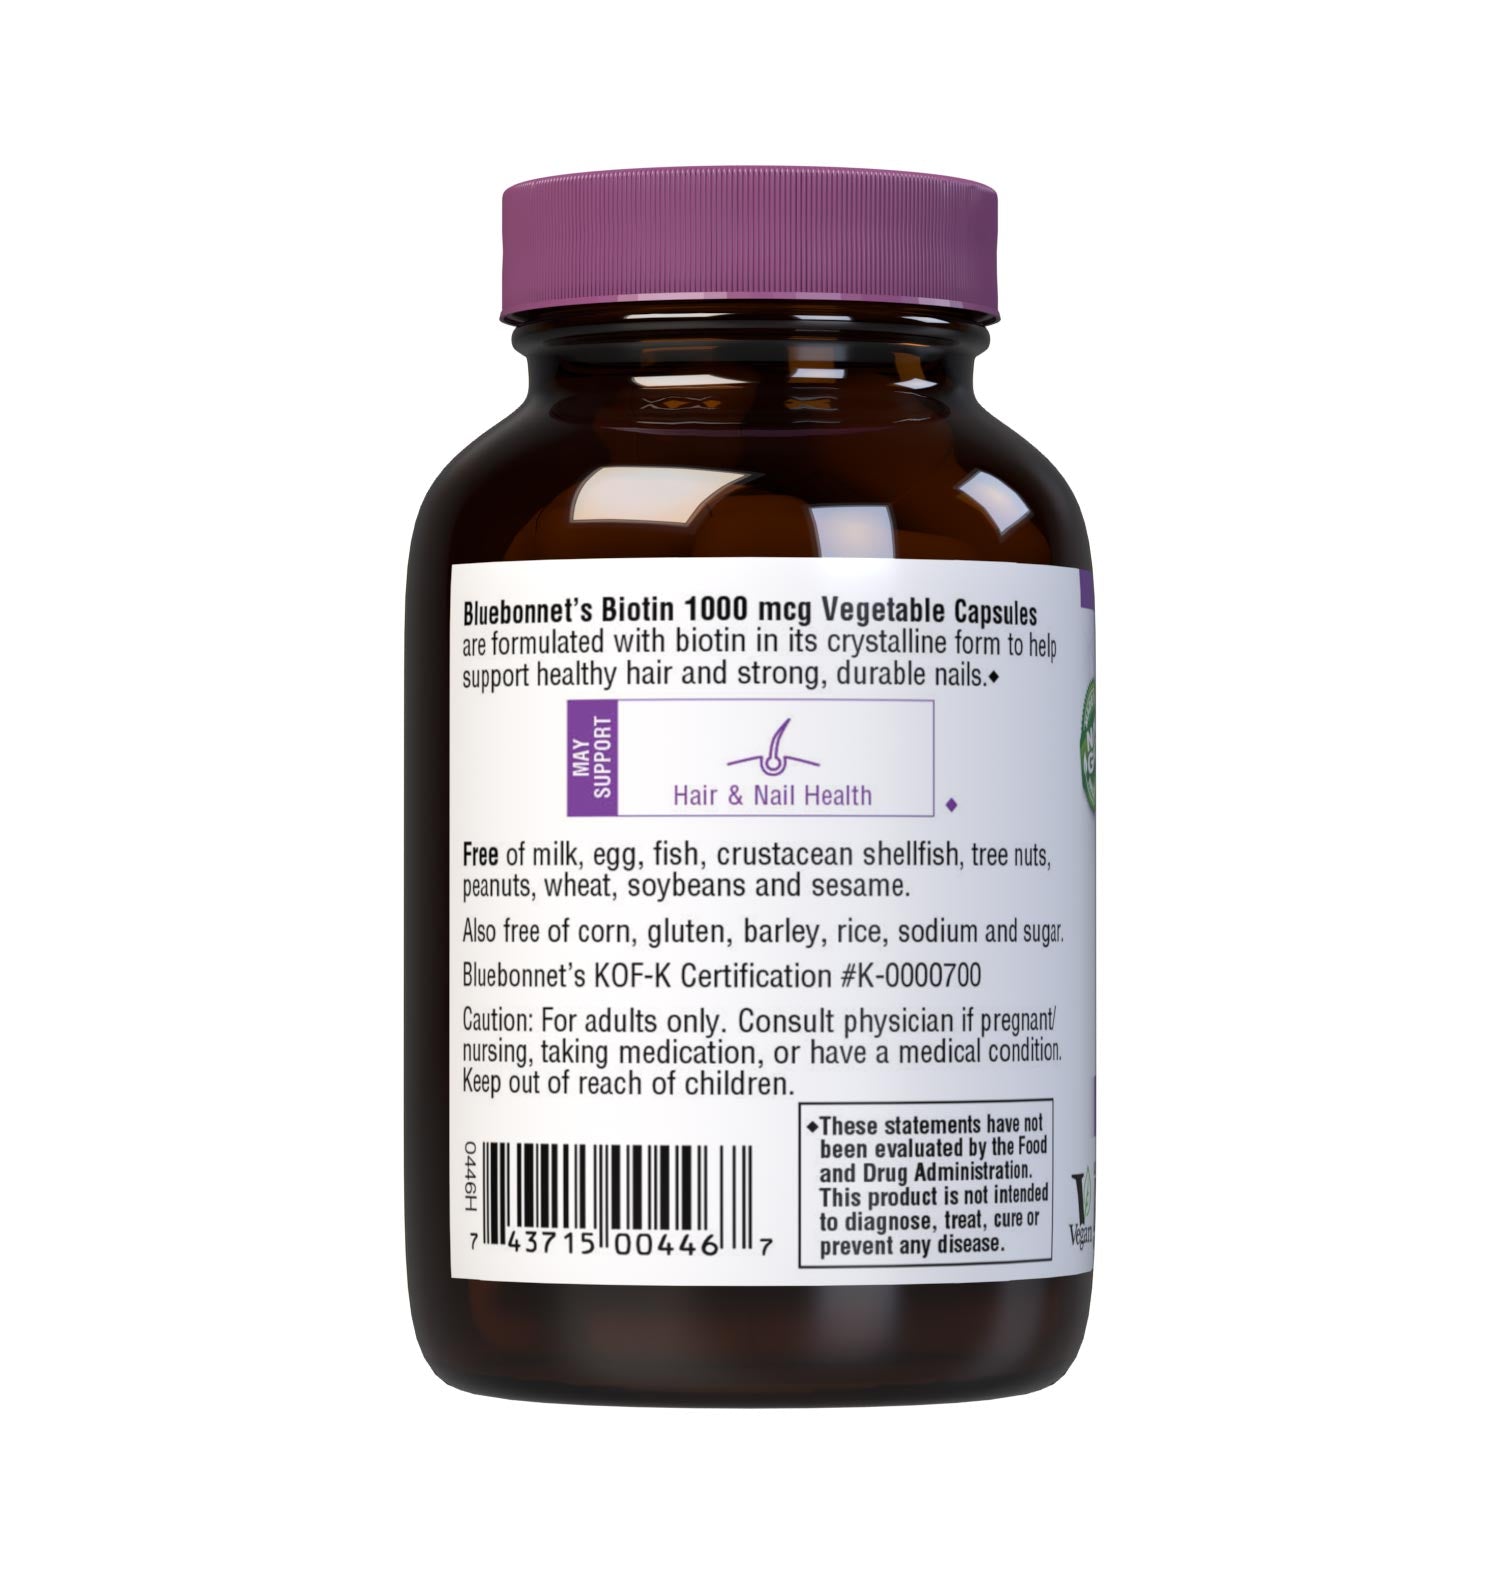 Bluebonnet’s Biotin 1000 mcg Capsules are formulated with yeast-free biotin in its crystalline form to support healthy hair and strong, durable nails. Description panel. #size_90 count